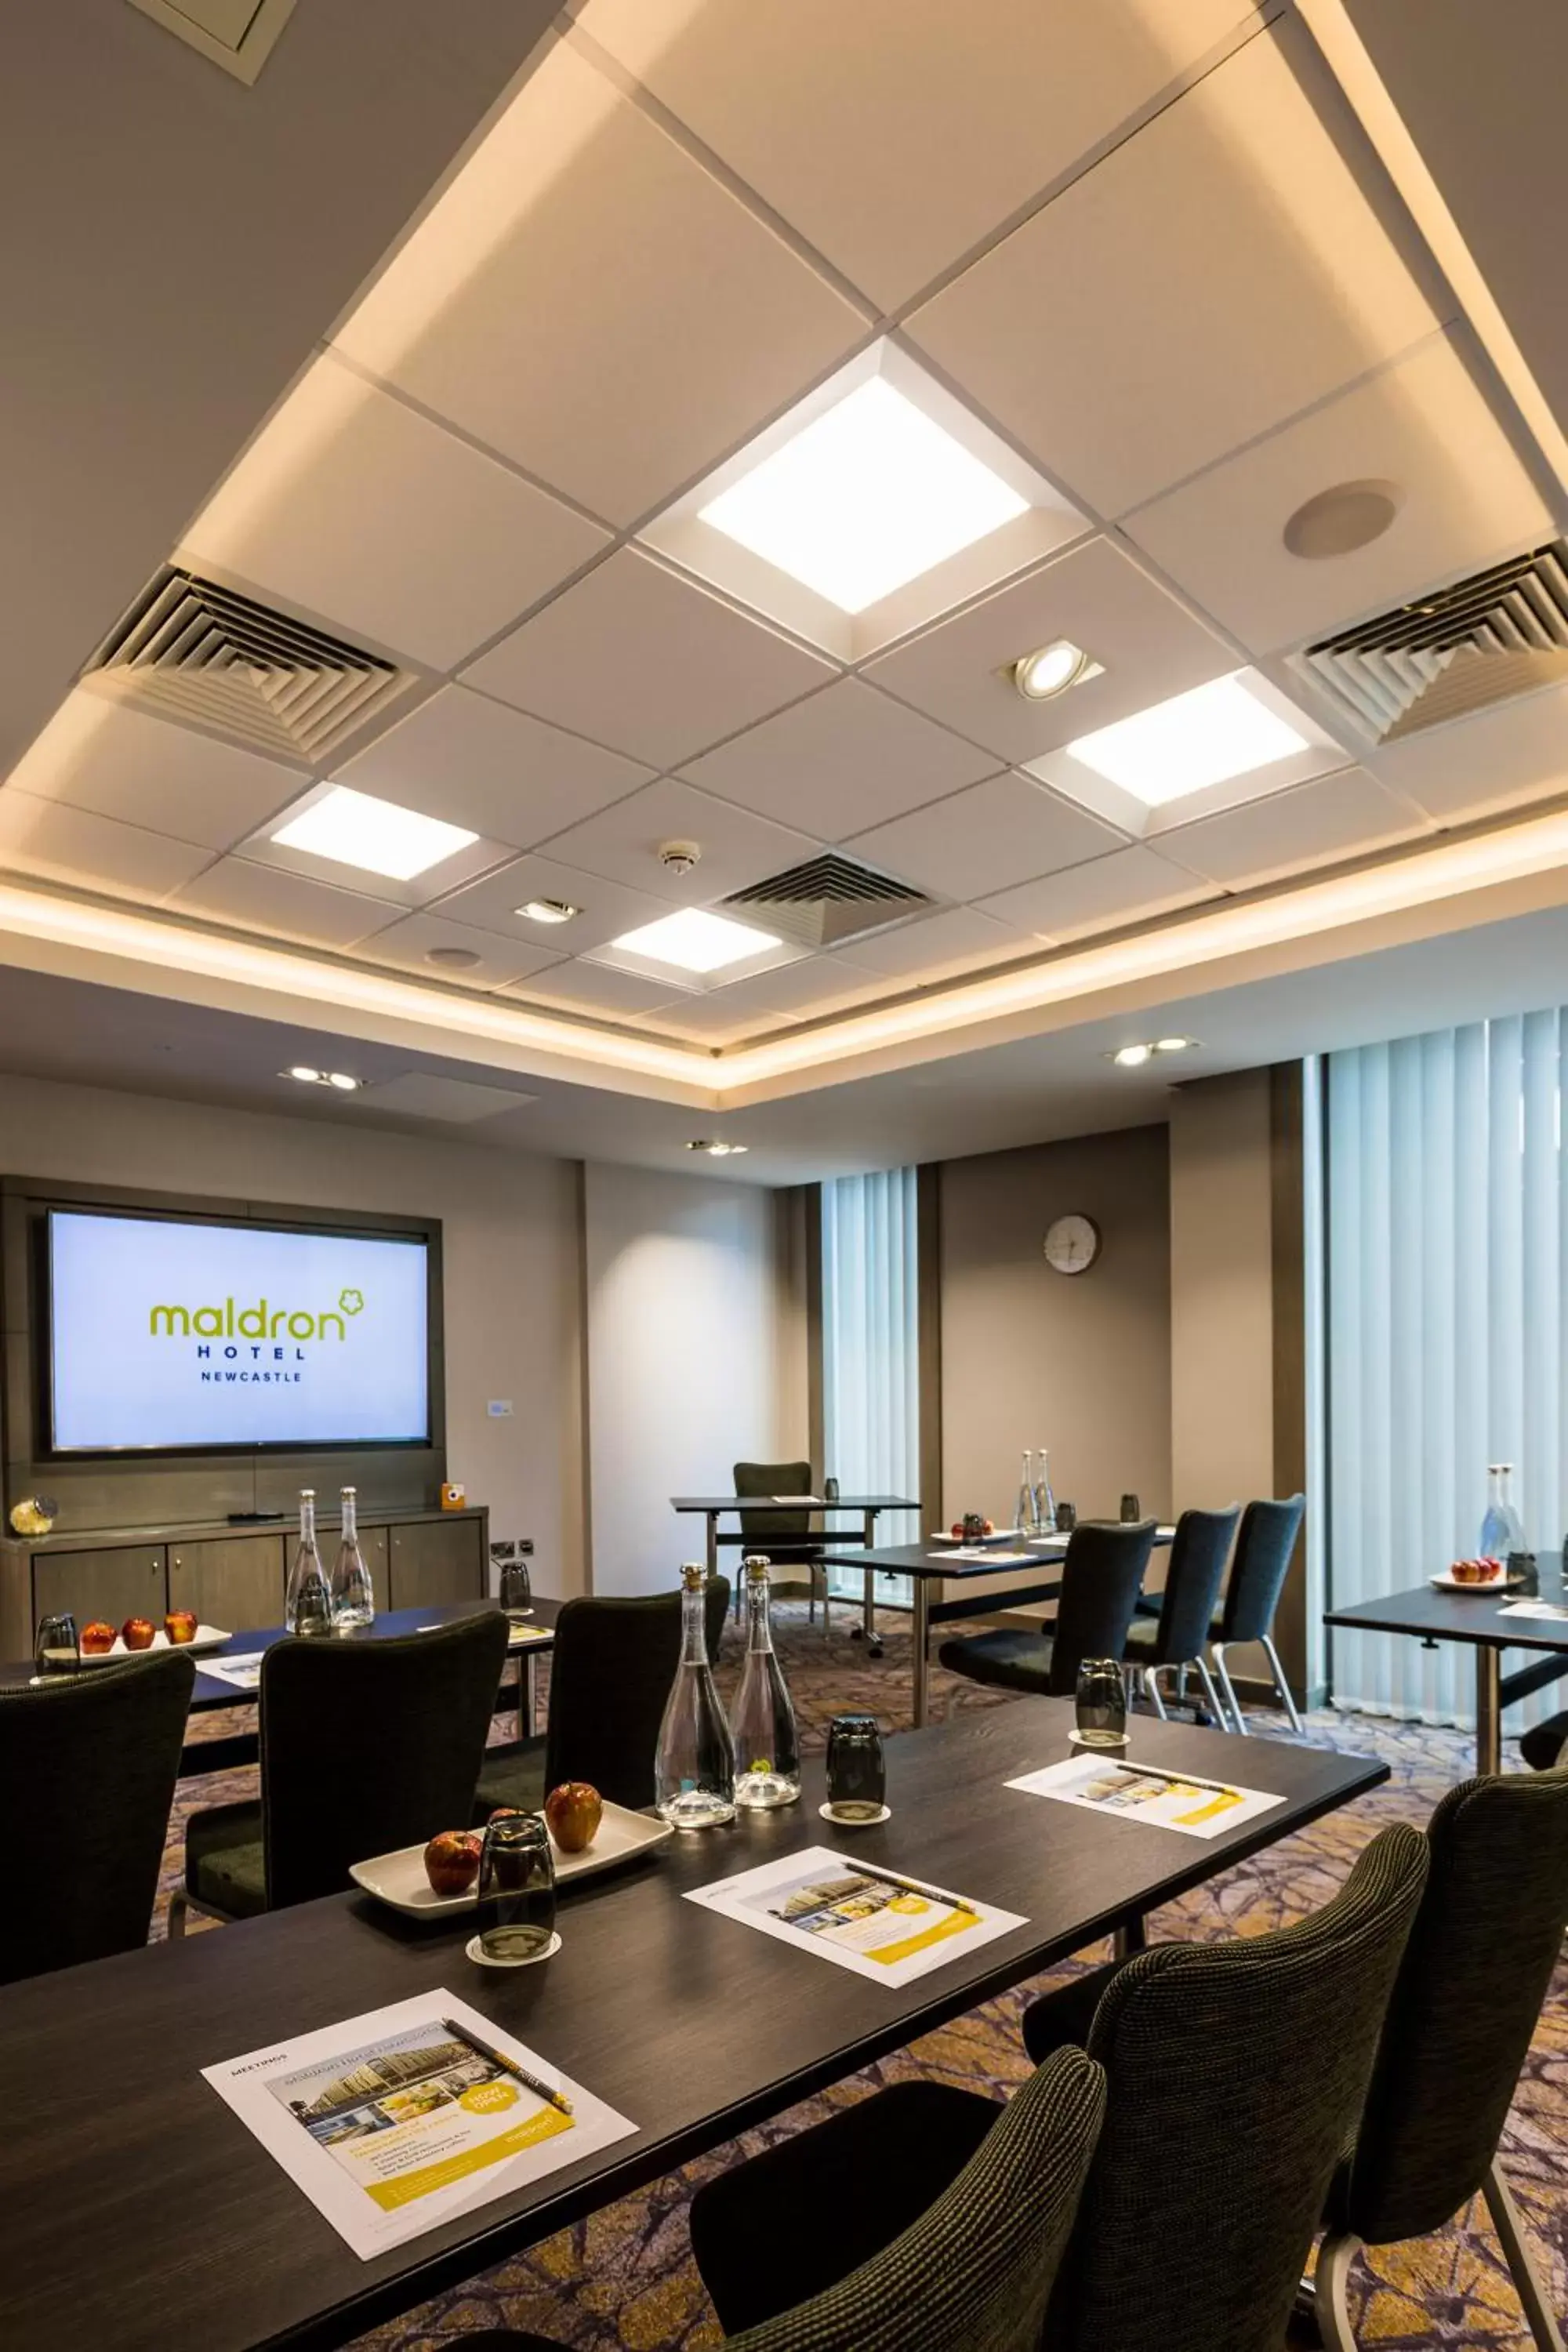 Meeting/conference room, Business Area/Conference Room in Maldron Hotel Newcastle